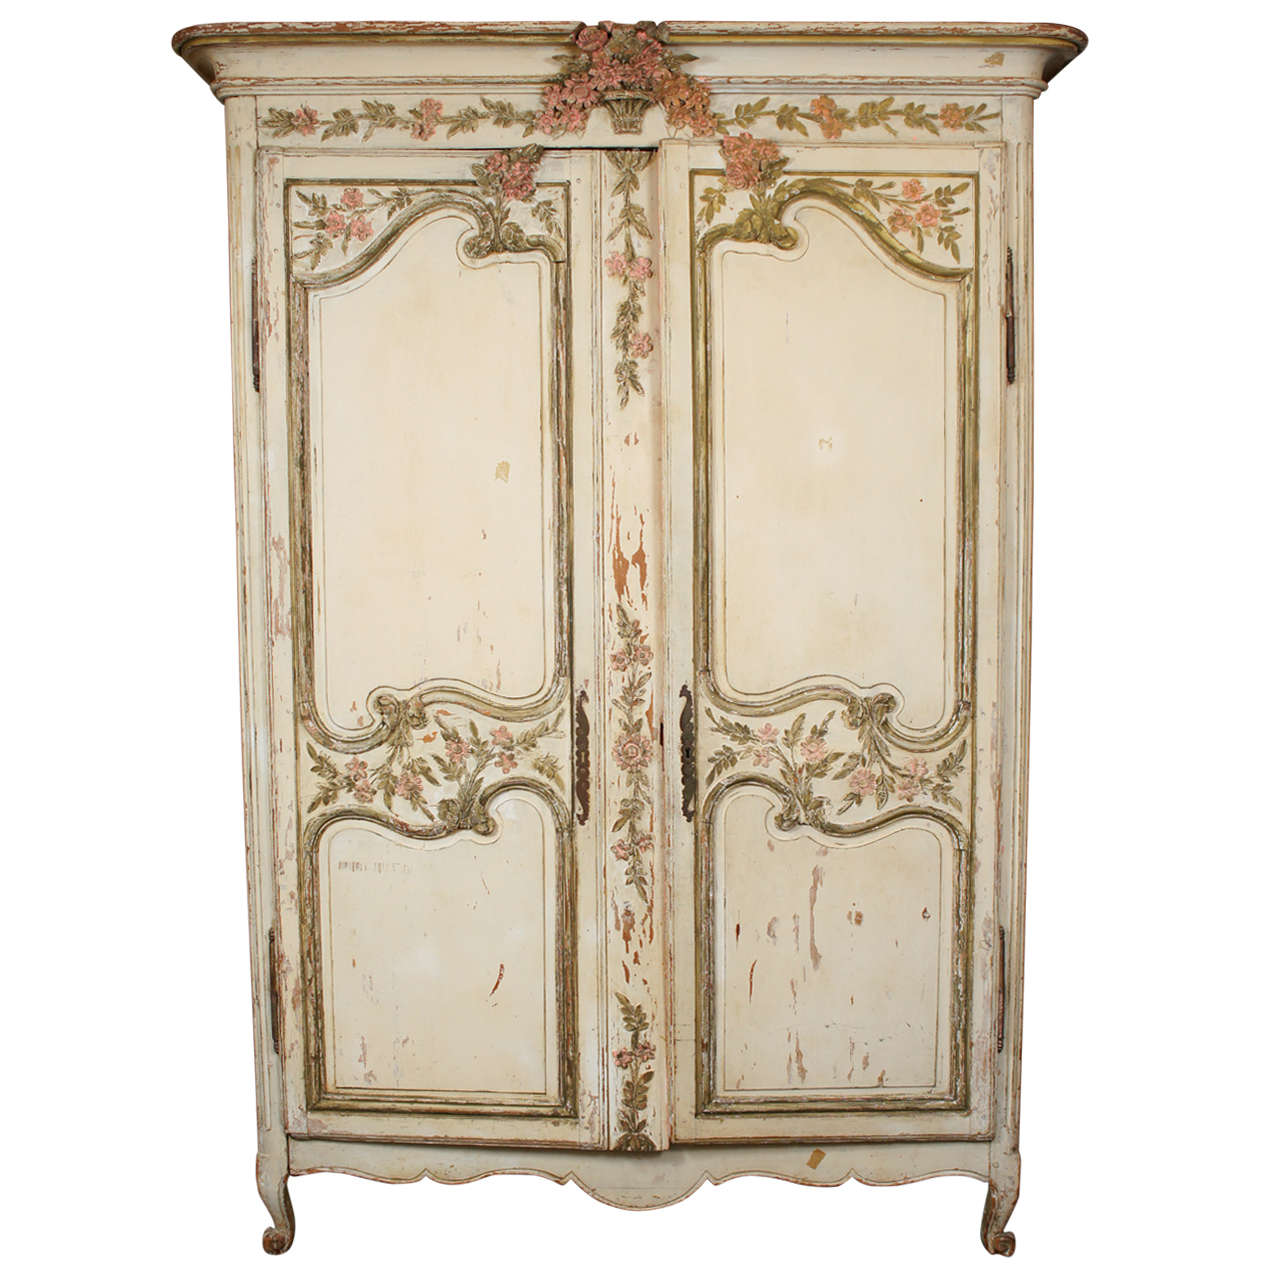  Painted French Wedding Armoire